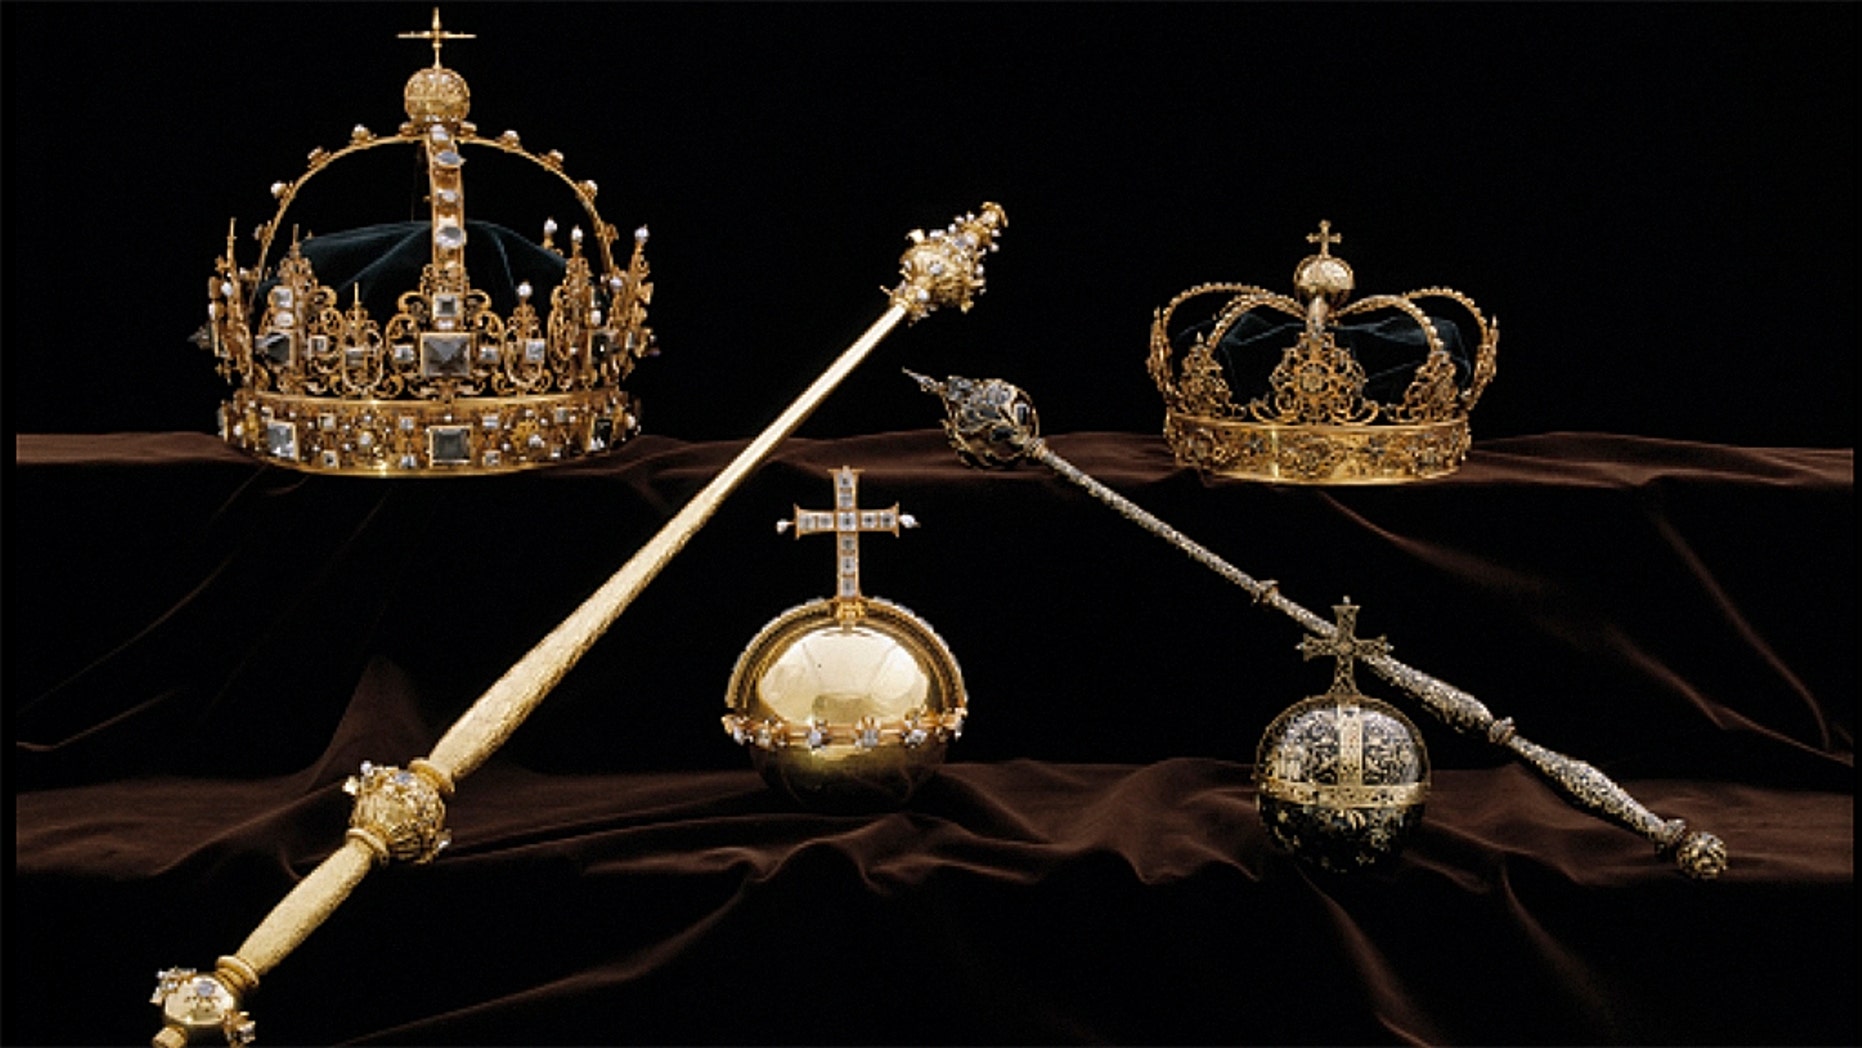 Stolen Swedish royal artifacts worth $7M may have been found, police say